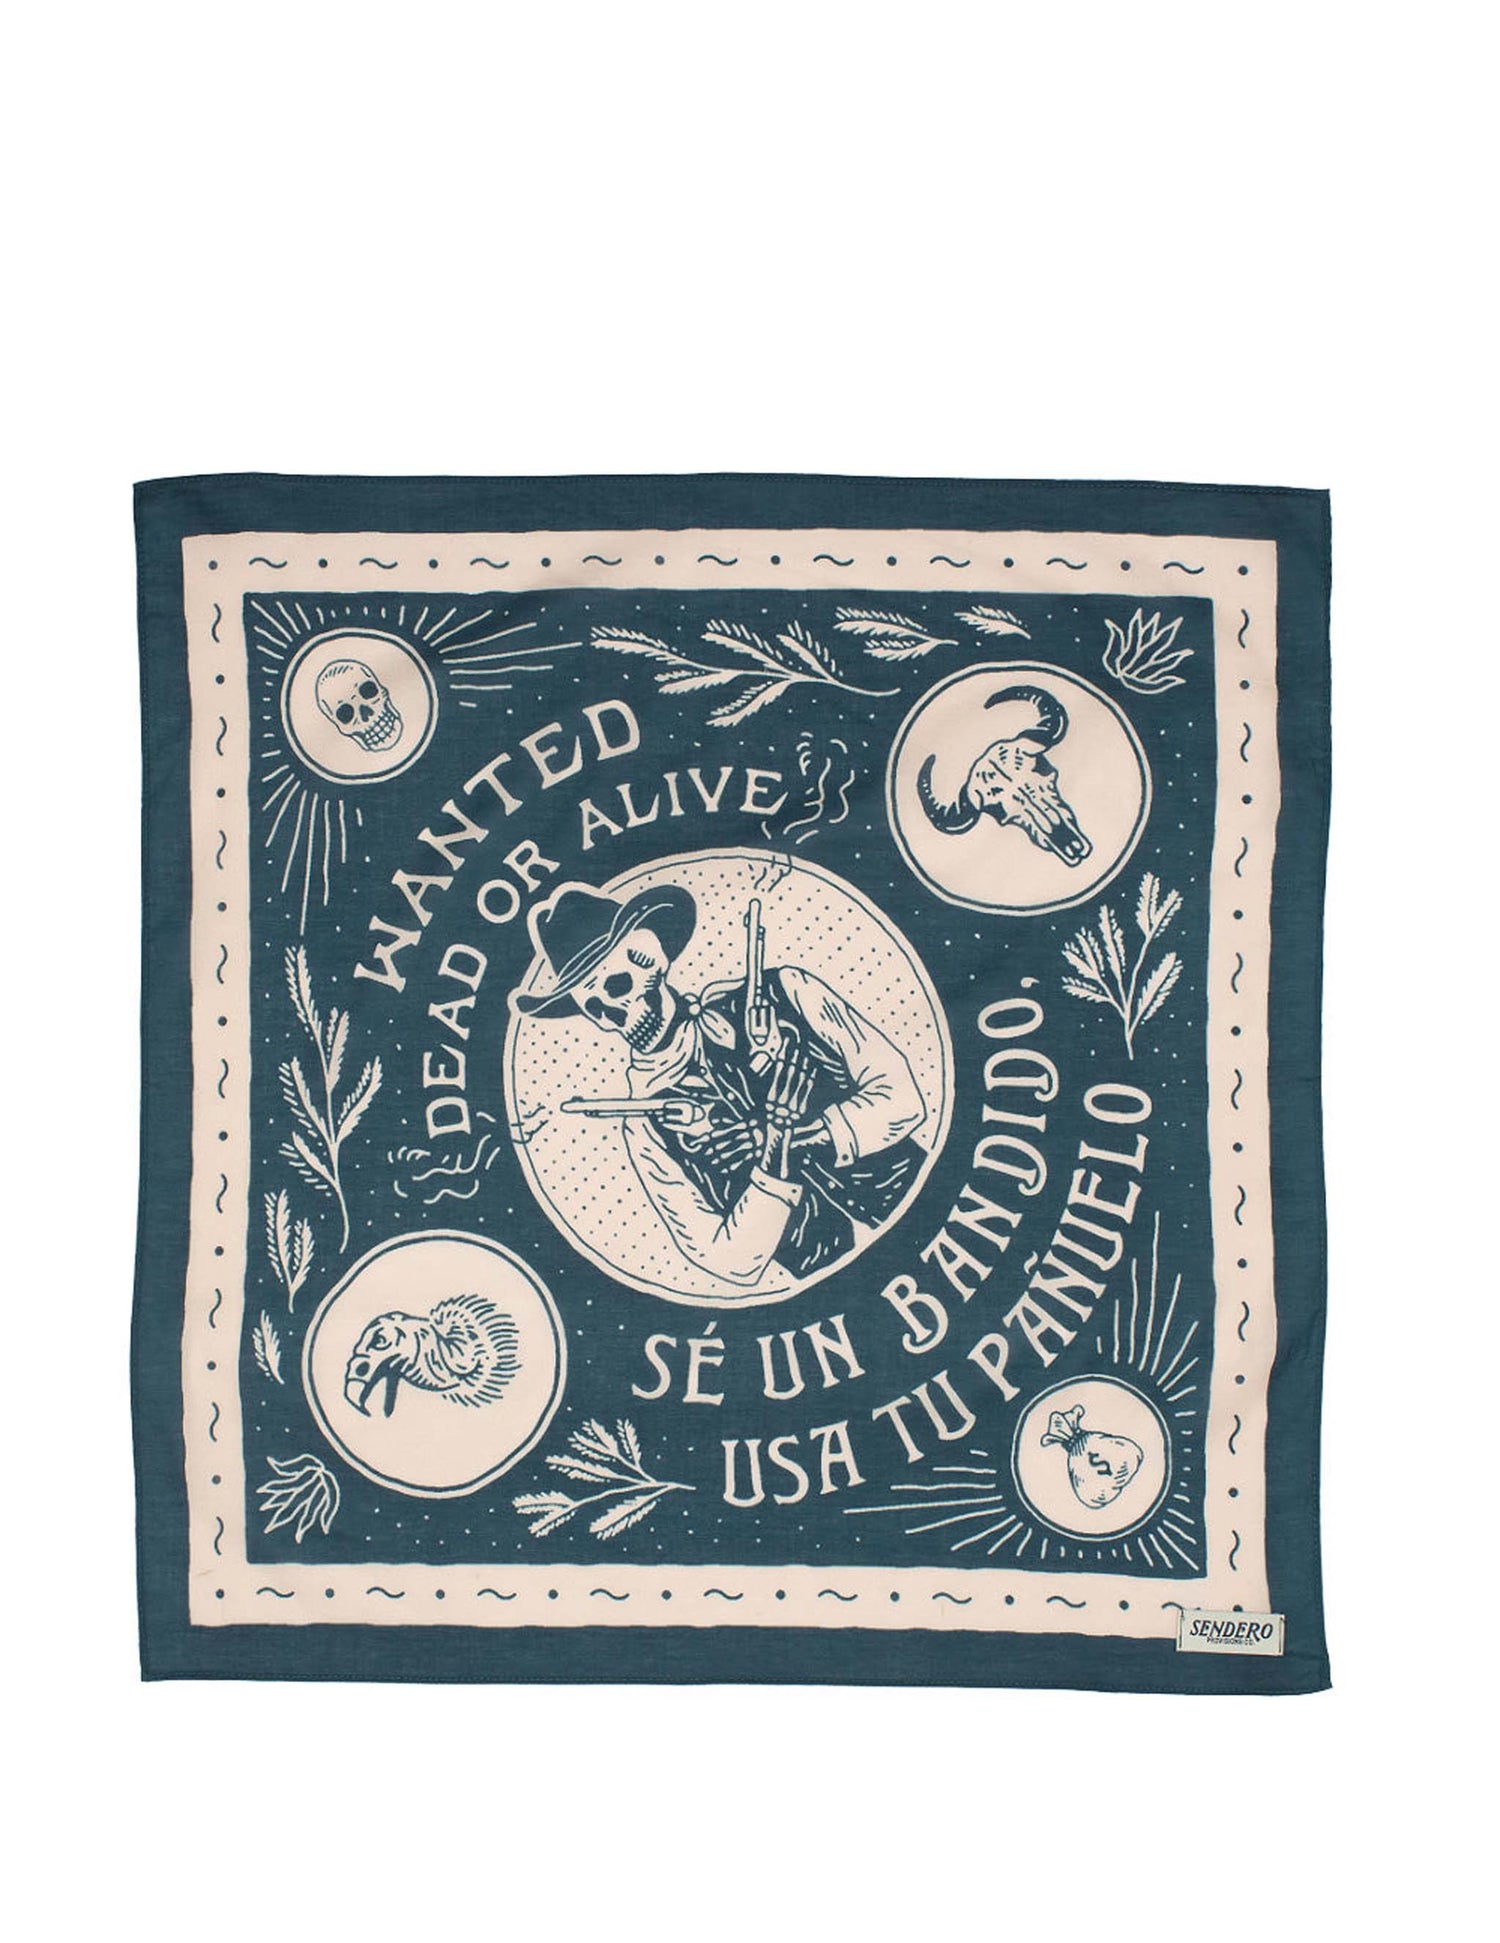 Wanted Dead or Alive Bandana